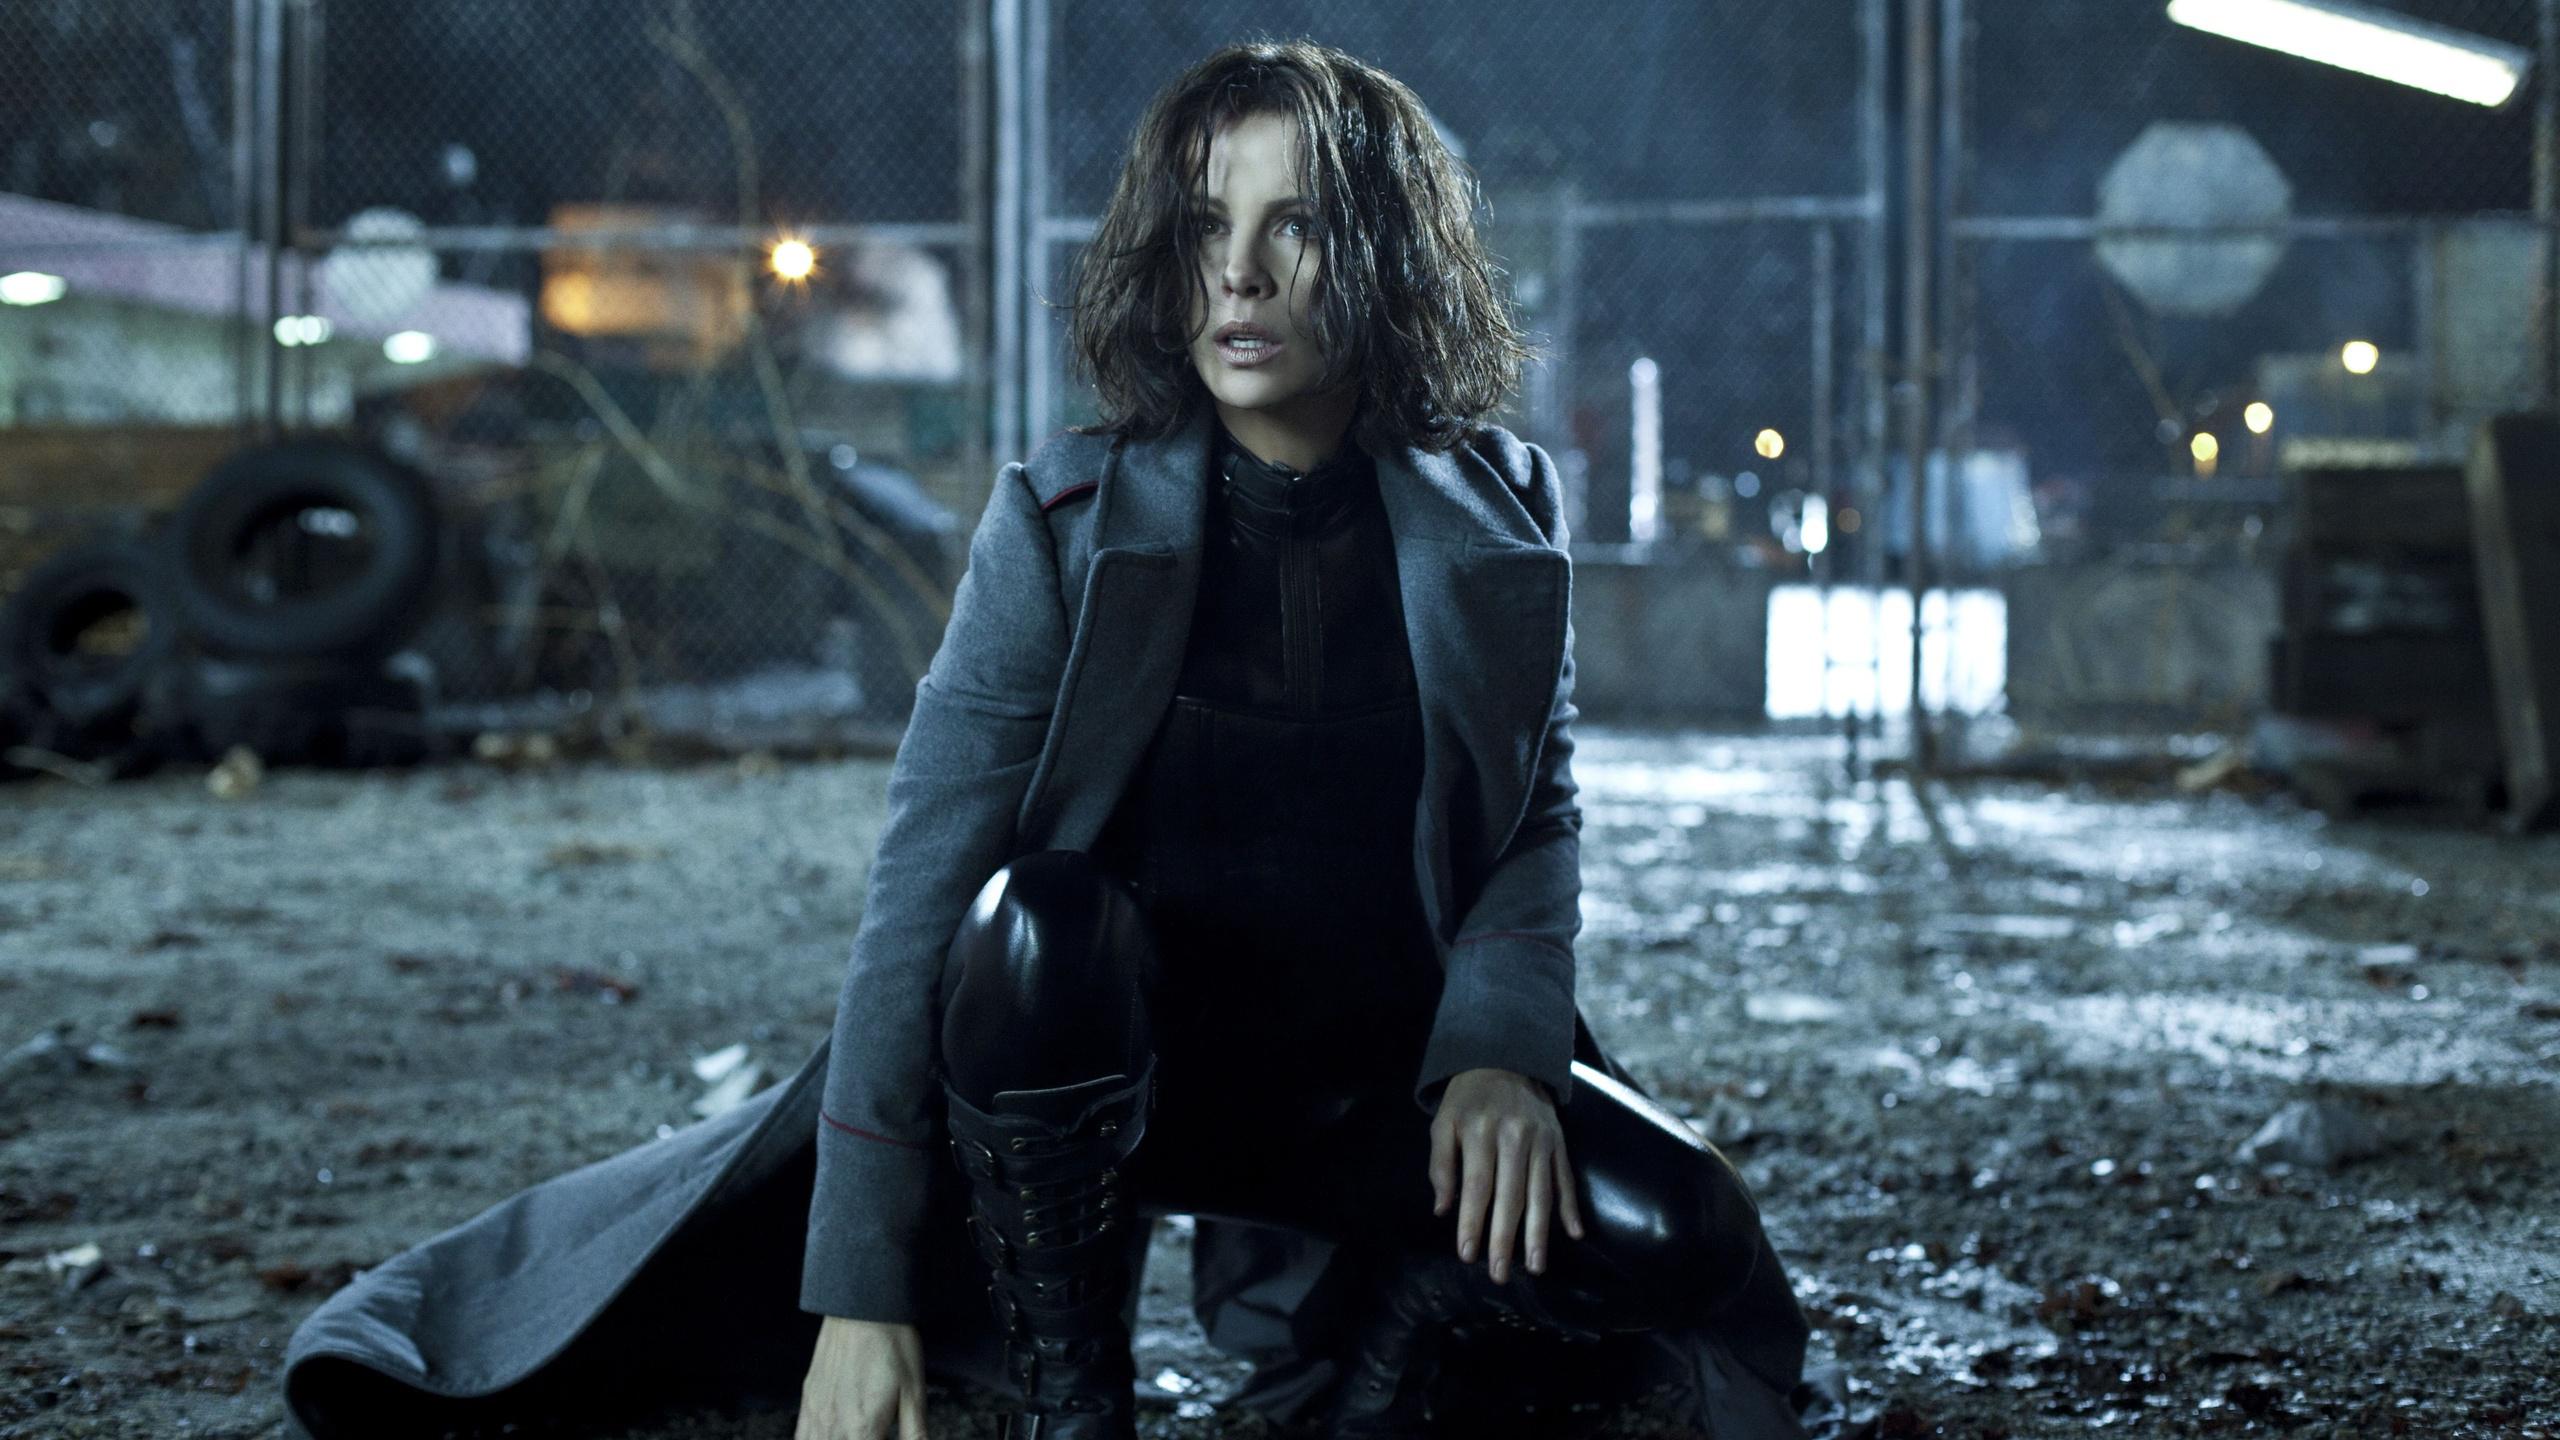 Kate Beckinsale Underworld High Quality And Resolution